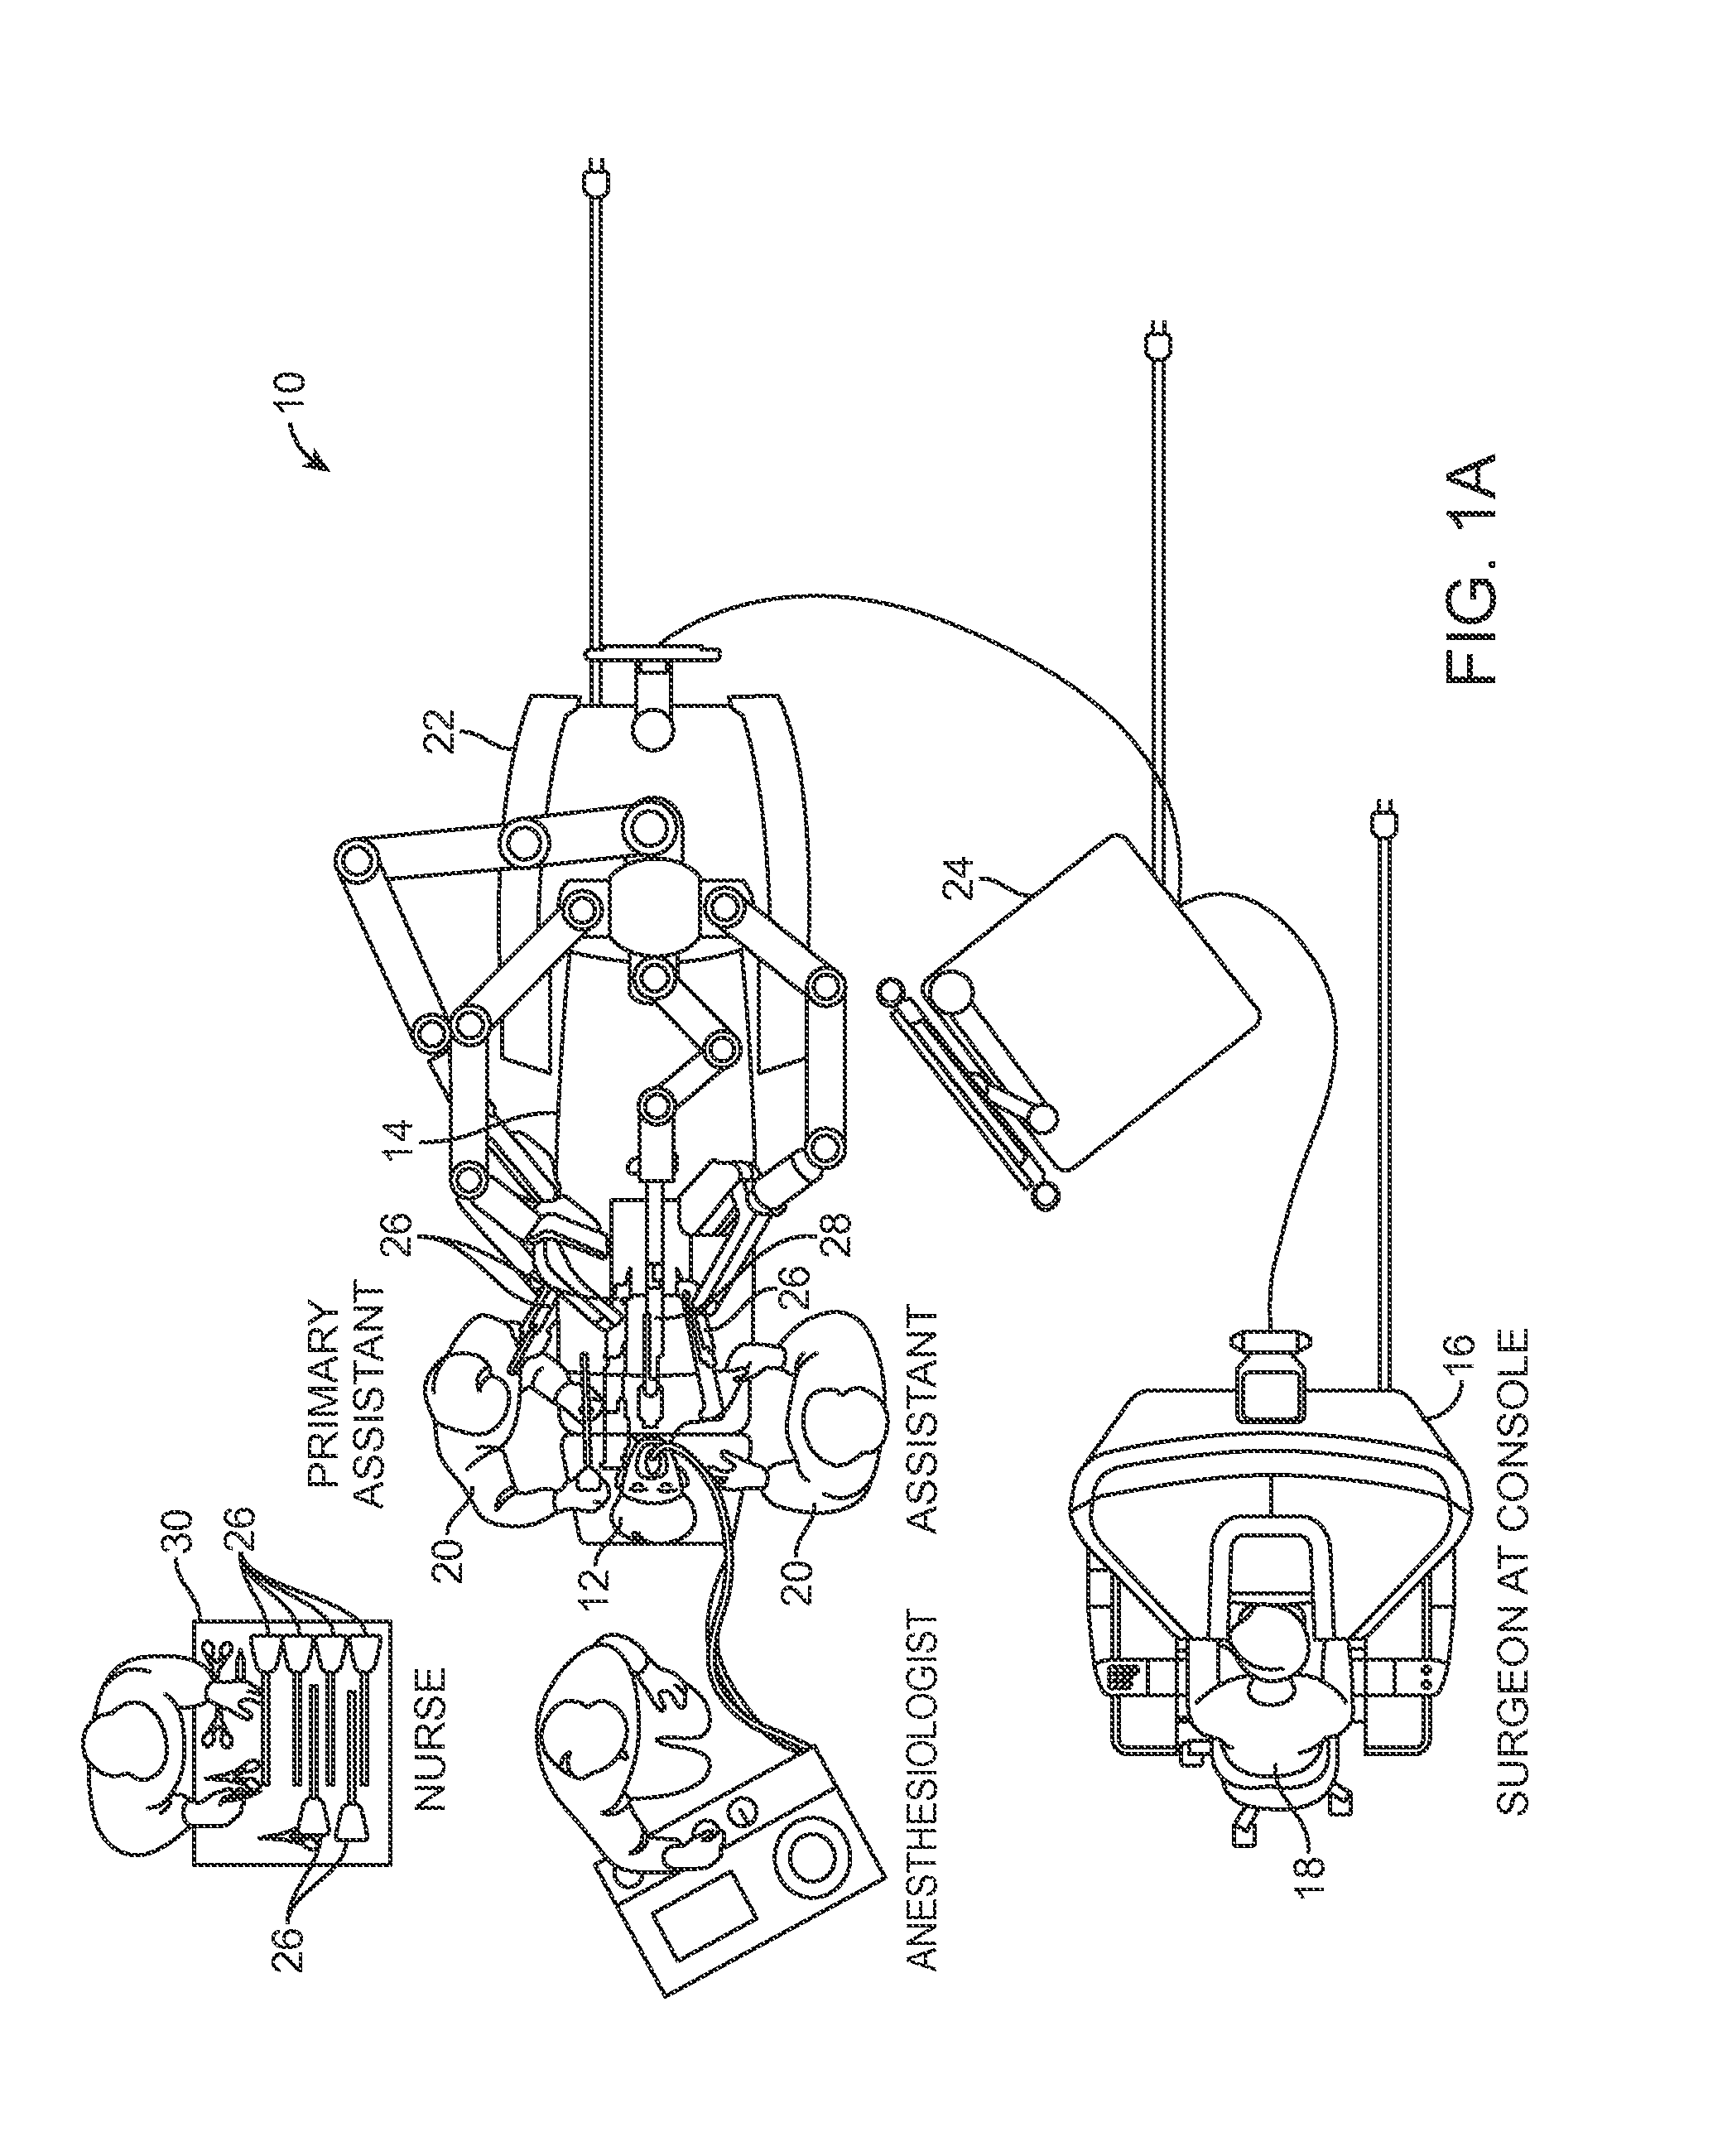 Systems and methods for facilitating access to edges of cartesian-coordinate space using the null space